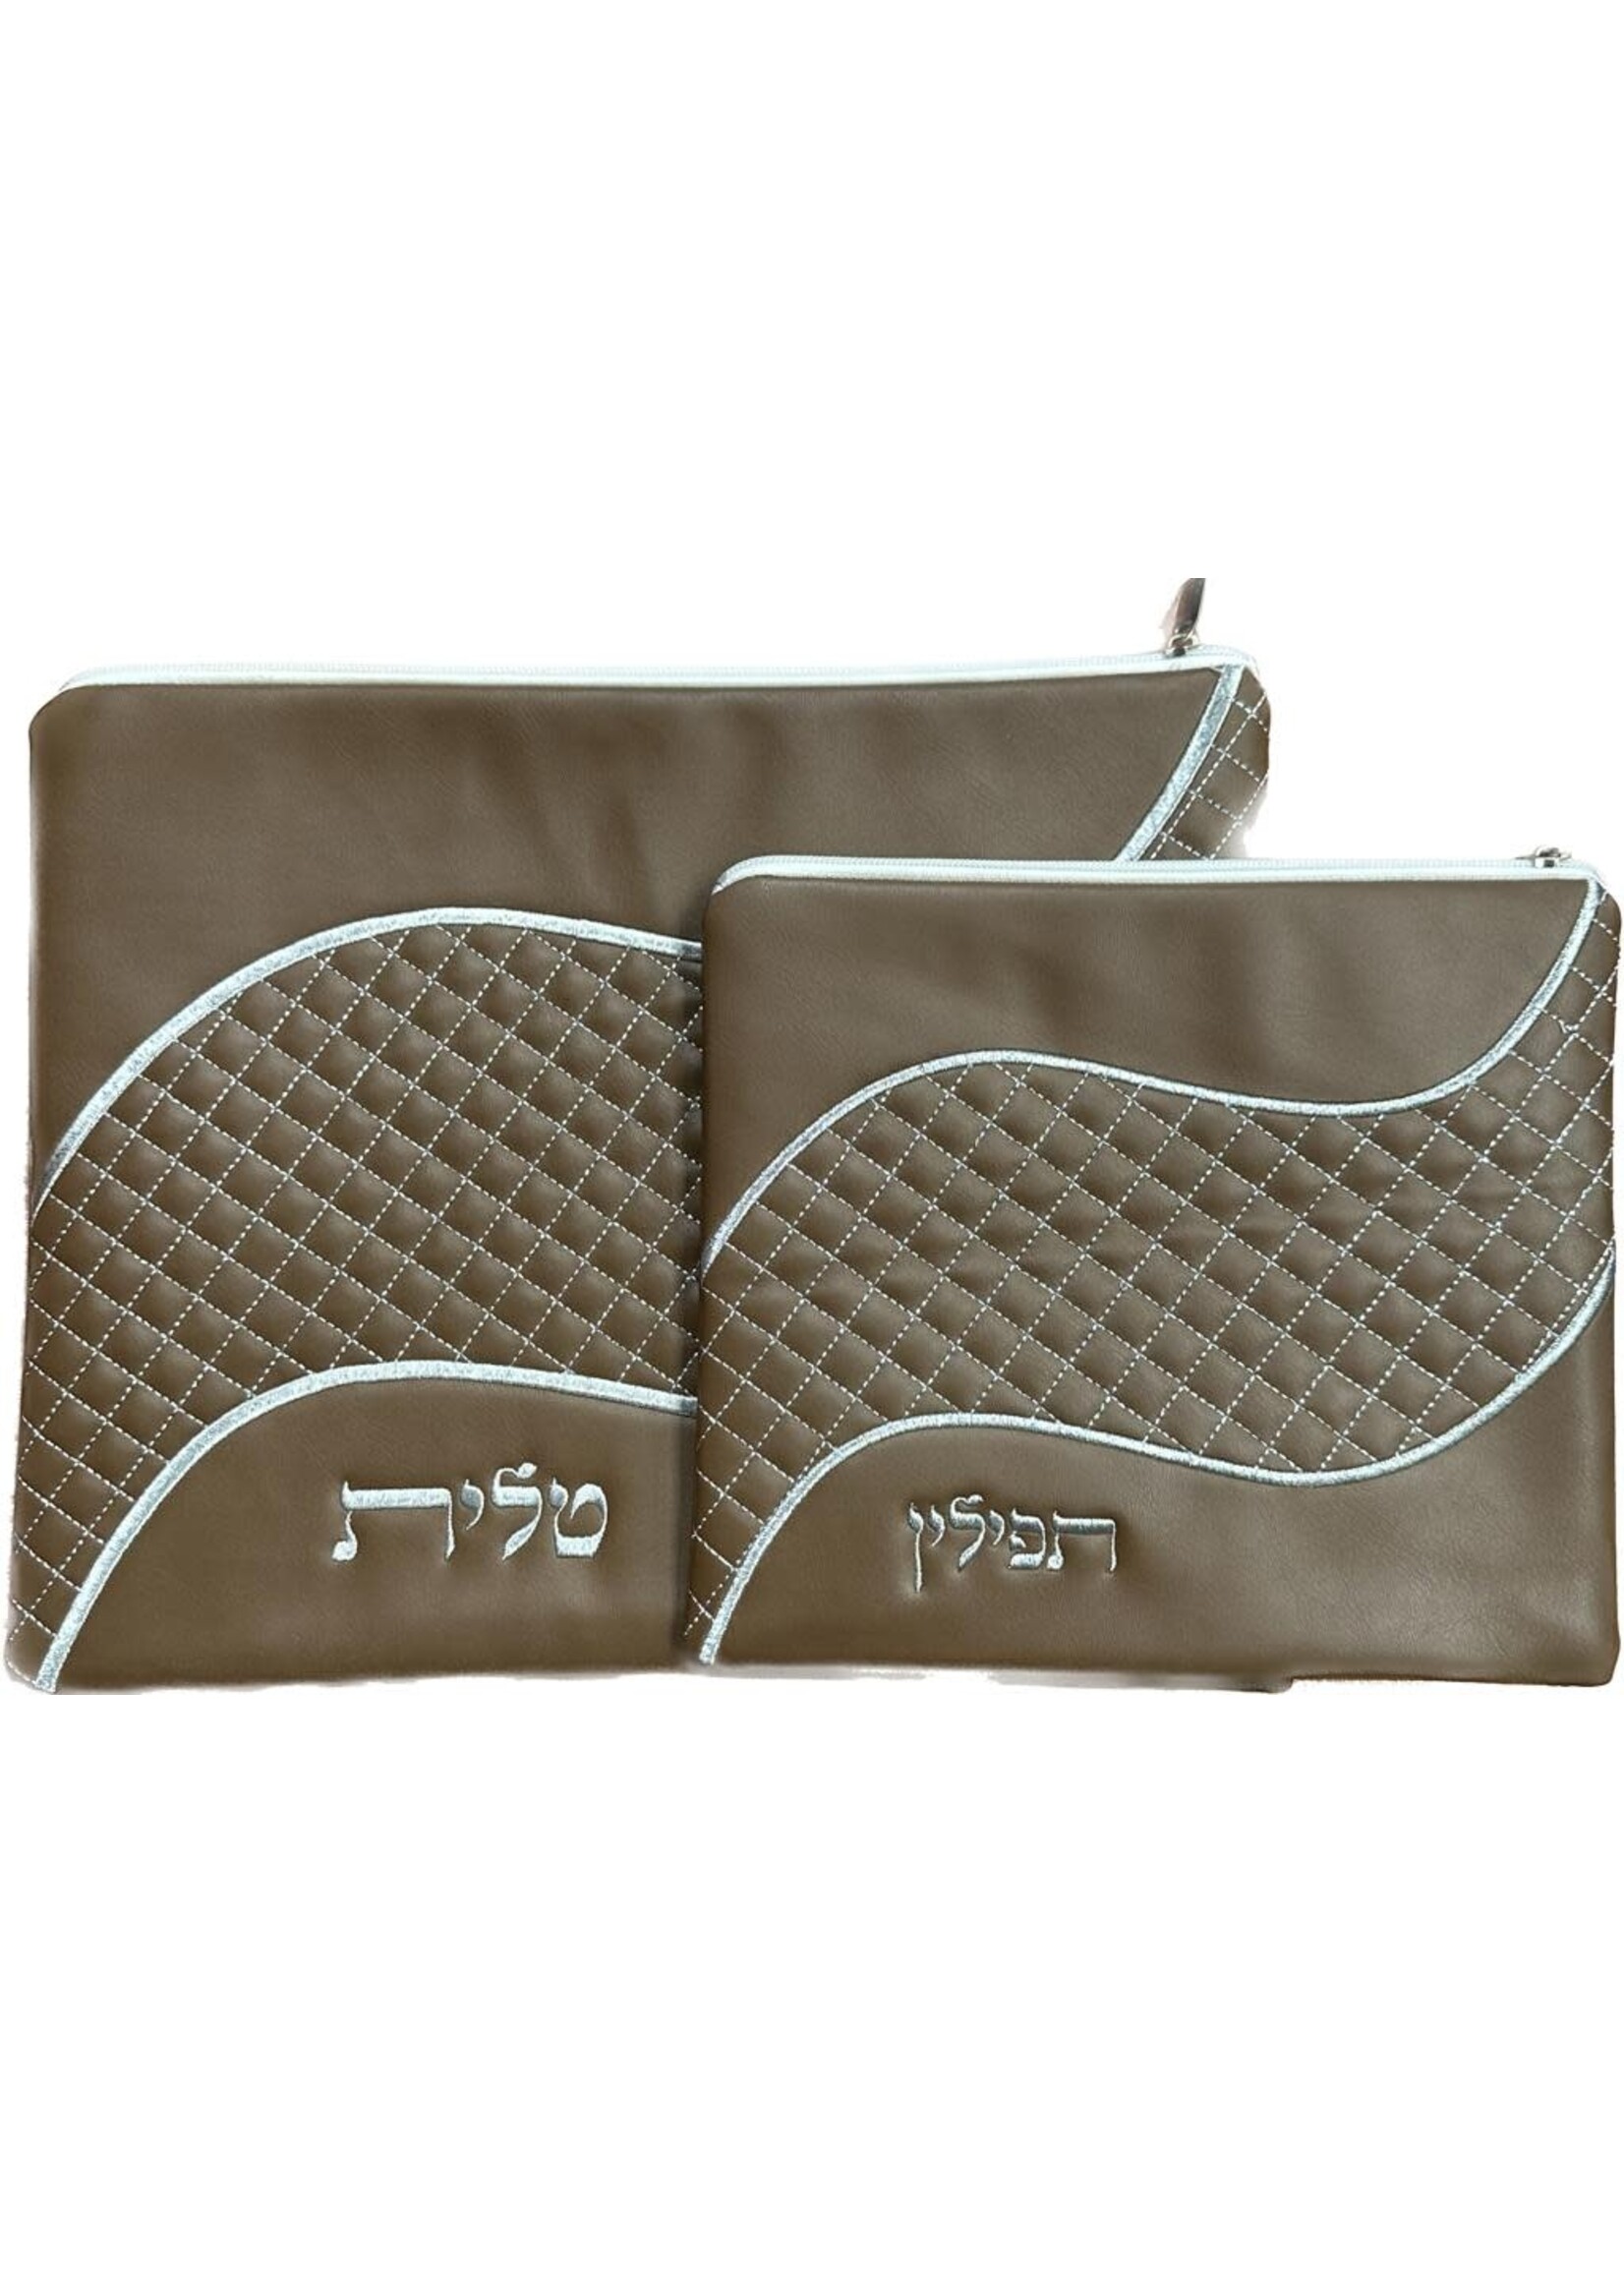 TALLIT BAG SET FAUX LEATHER CARAMEL WITH SILVER KOTEL EMBRIODERY